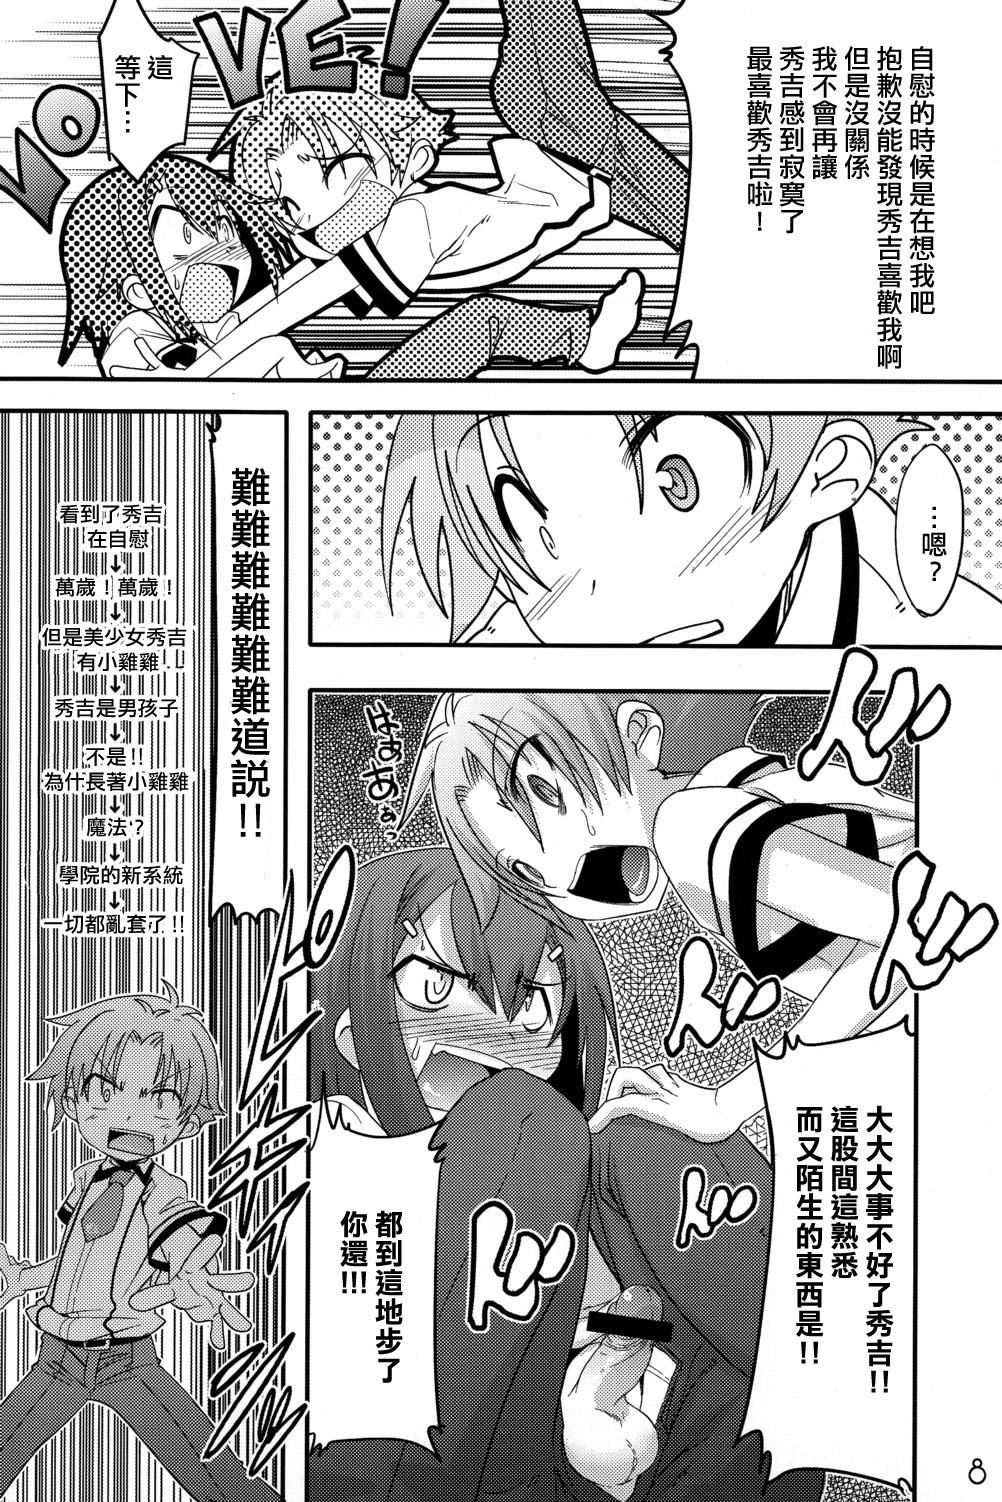 Con Fortune Favours Fools - Baka to test to shoukanjuu Village - Page 7